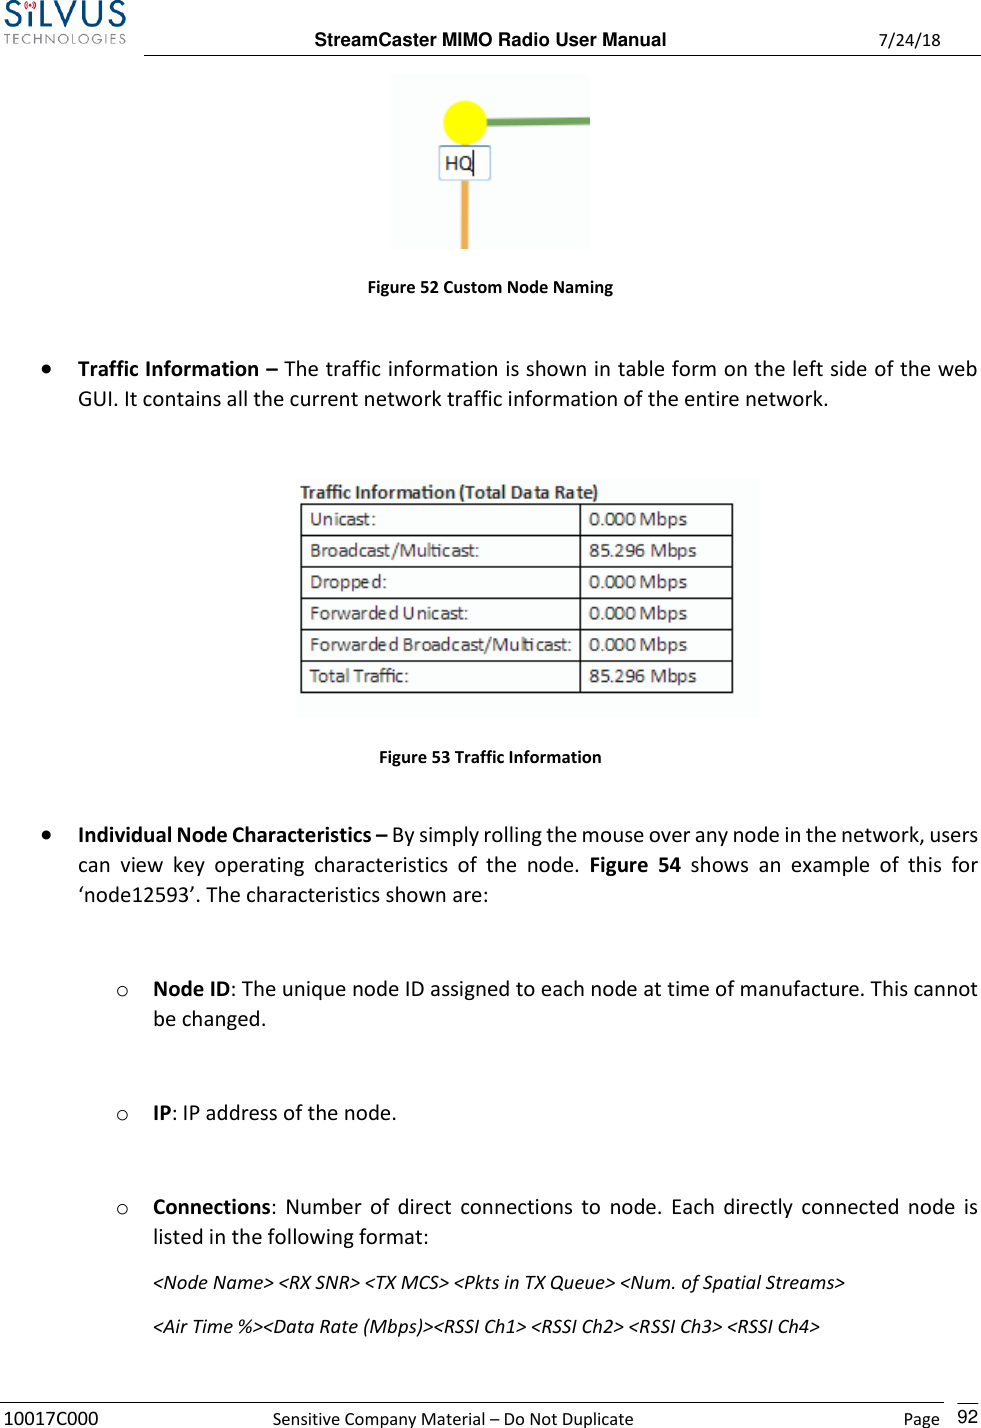  StreamCaster MIMO Radio User Manual  7/24/18 10017C000  Sensitive Company Material – Do Not Duplicate    Page    92  Figure 52 Custom Node Naming  • Traffic Information – The traffic information is shown in table form on the left side of the web GUI. It contains all the current network traffic information of the entire network.   Figure 53 Traffic Information  • Individual Node Characteristics – By simply rolling the mouse over any node in the network, users can  view  key  operating  characteristics  of  the  node.  Figure  54  shows  an  example  of  this  for ‘node12593’. The characteristics shown are:  o Node ID: The unique node ID assigned to each node at time of manufacture. This cannot be changed.  o IP: IP address of the node.  o Connections: Number of direct  connections to node. Each directly connected node is listed in the following format:  &lt;Node Name&gt; &lt;RX SNR&gt; &lt;TX MCS&gt; &lt;Pkts in TX Queue&gt; &lt;Num. of Spatial Streams&gt; &lt;Air Time %&gt;&lt;Data Rate (Mbps)&gt;&lt;RSSI Ch1&gt; &lt;RSSI Ch2&gt; &lt;RSSI Ch3&gt; &lt;RSSI Ch4&gt;      